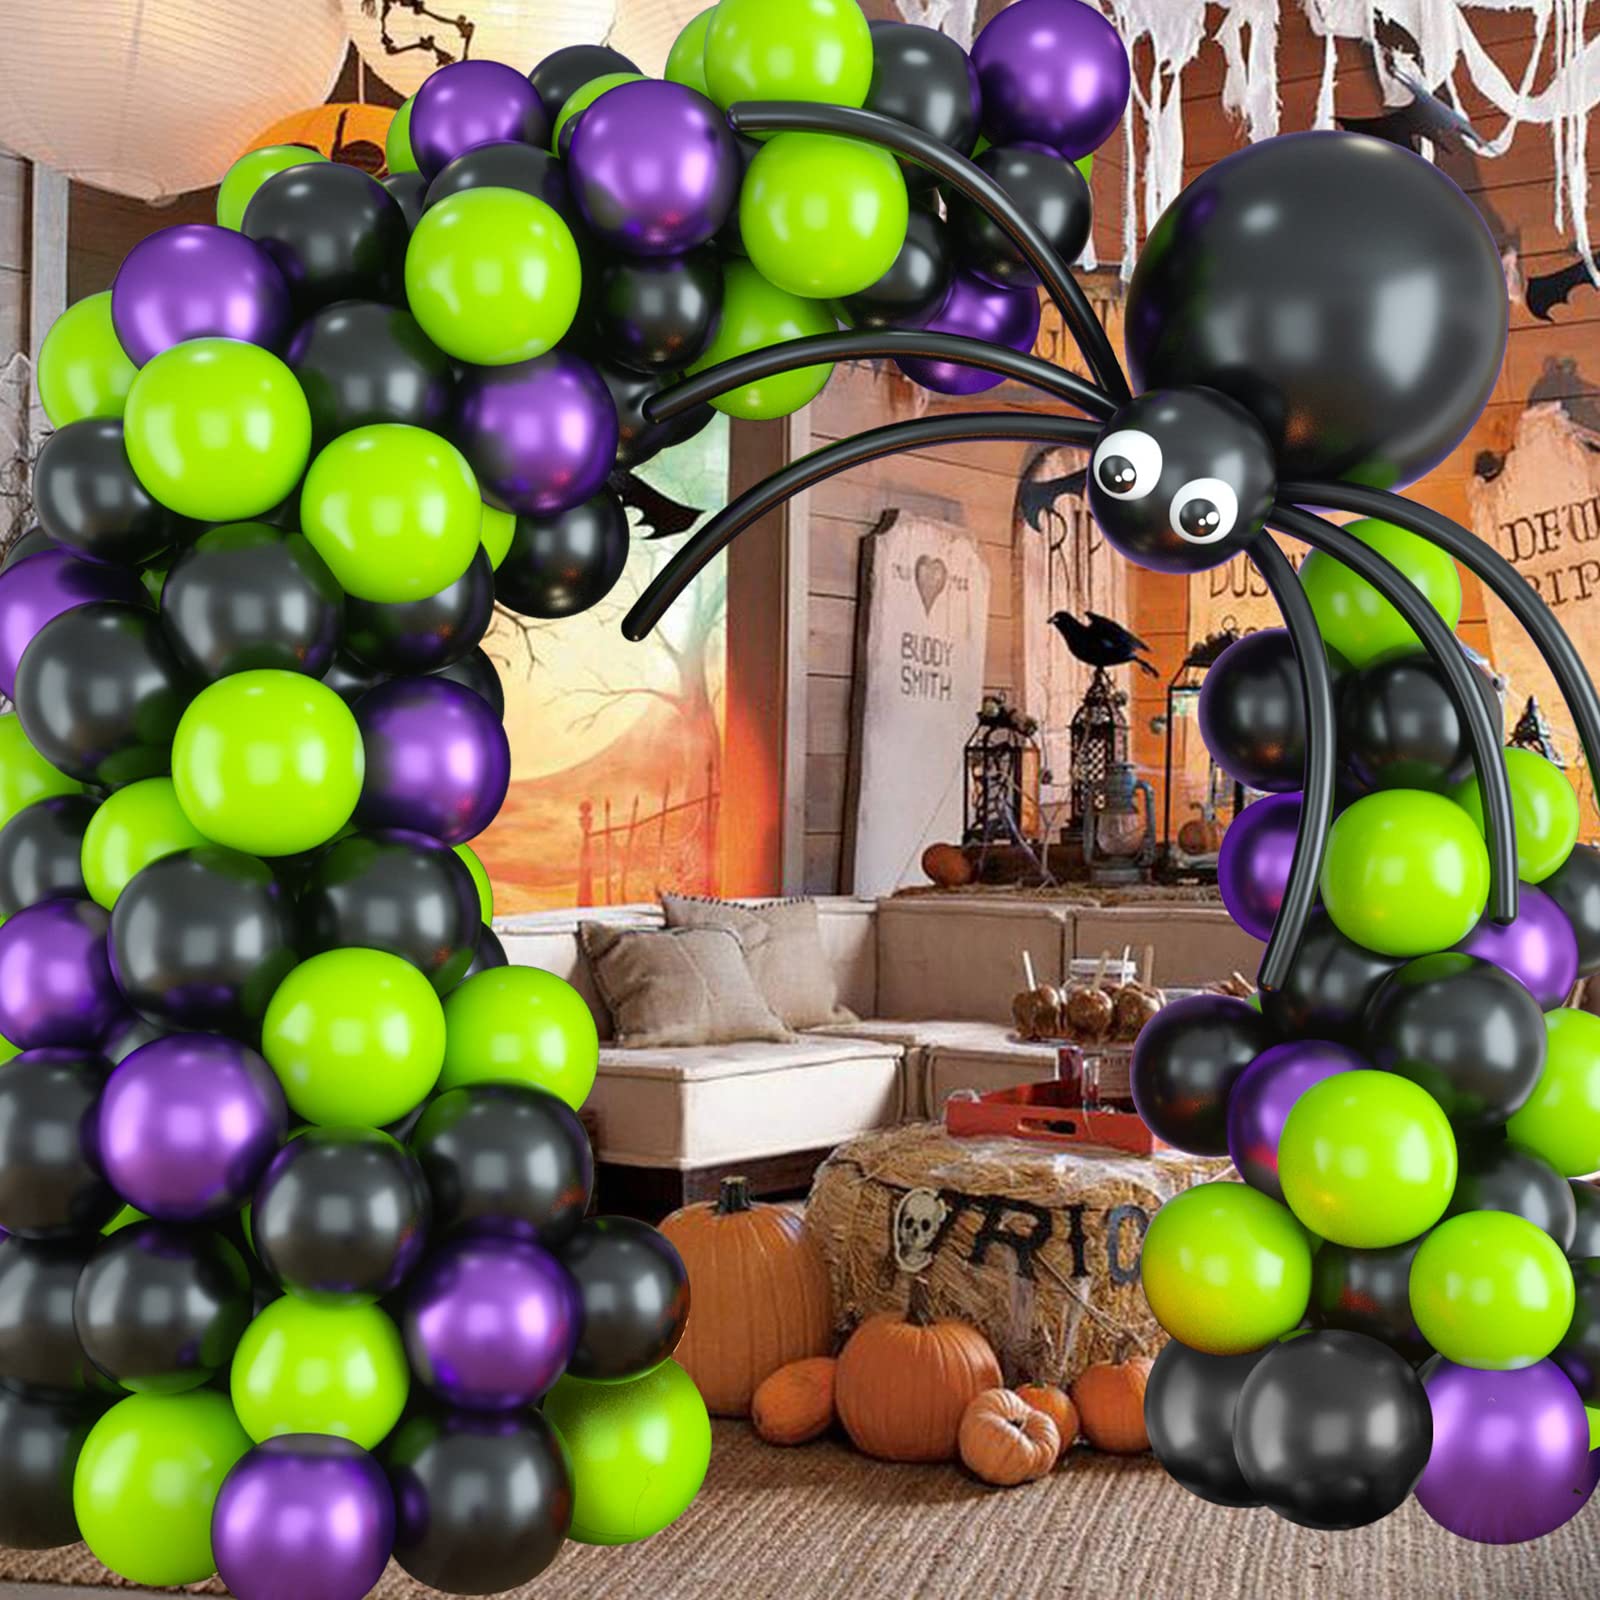 Halloween Balloon Arch Garland Kit with Big Spider DIY Balloons, Matte Black Lime Green Purple Metallic Latex Balloons Garland with Eye Balloons for Halloween Party Home Garden Outdoor Decorations